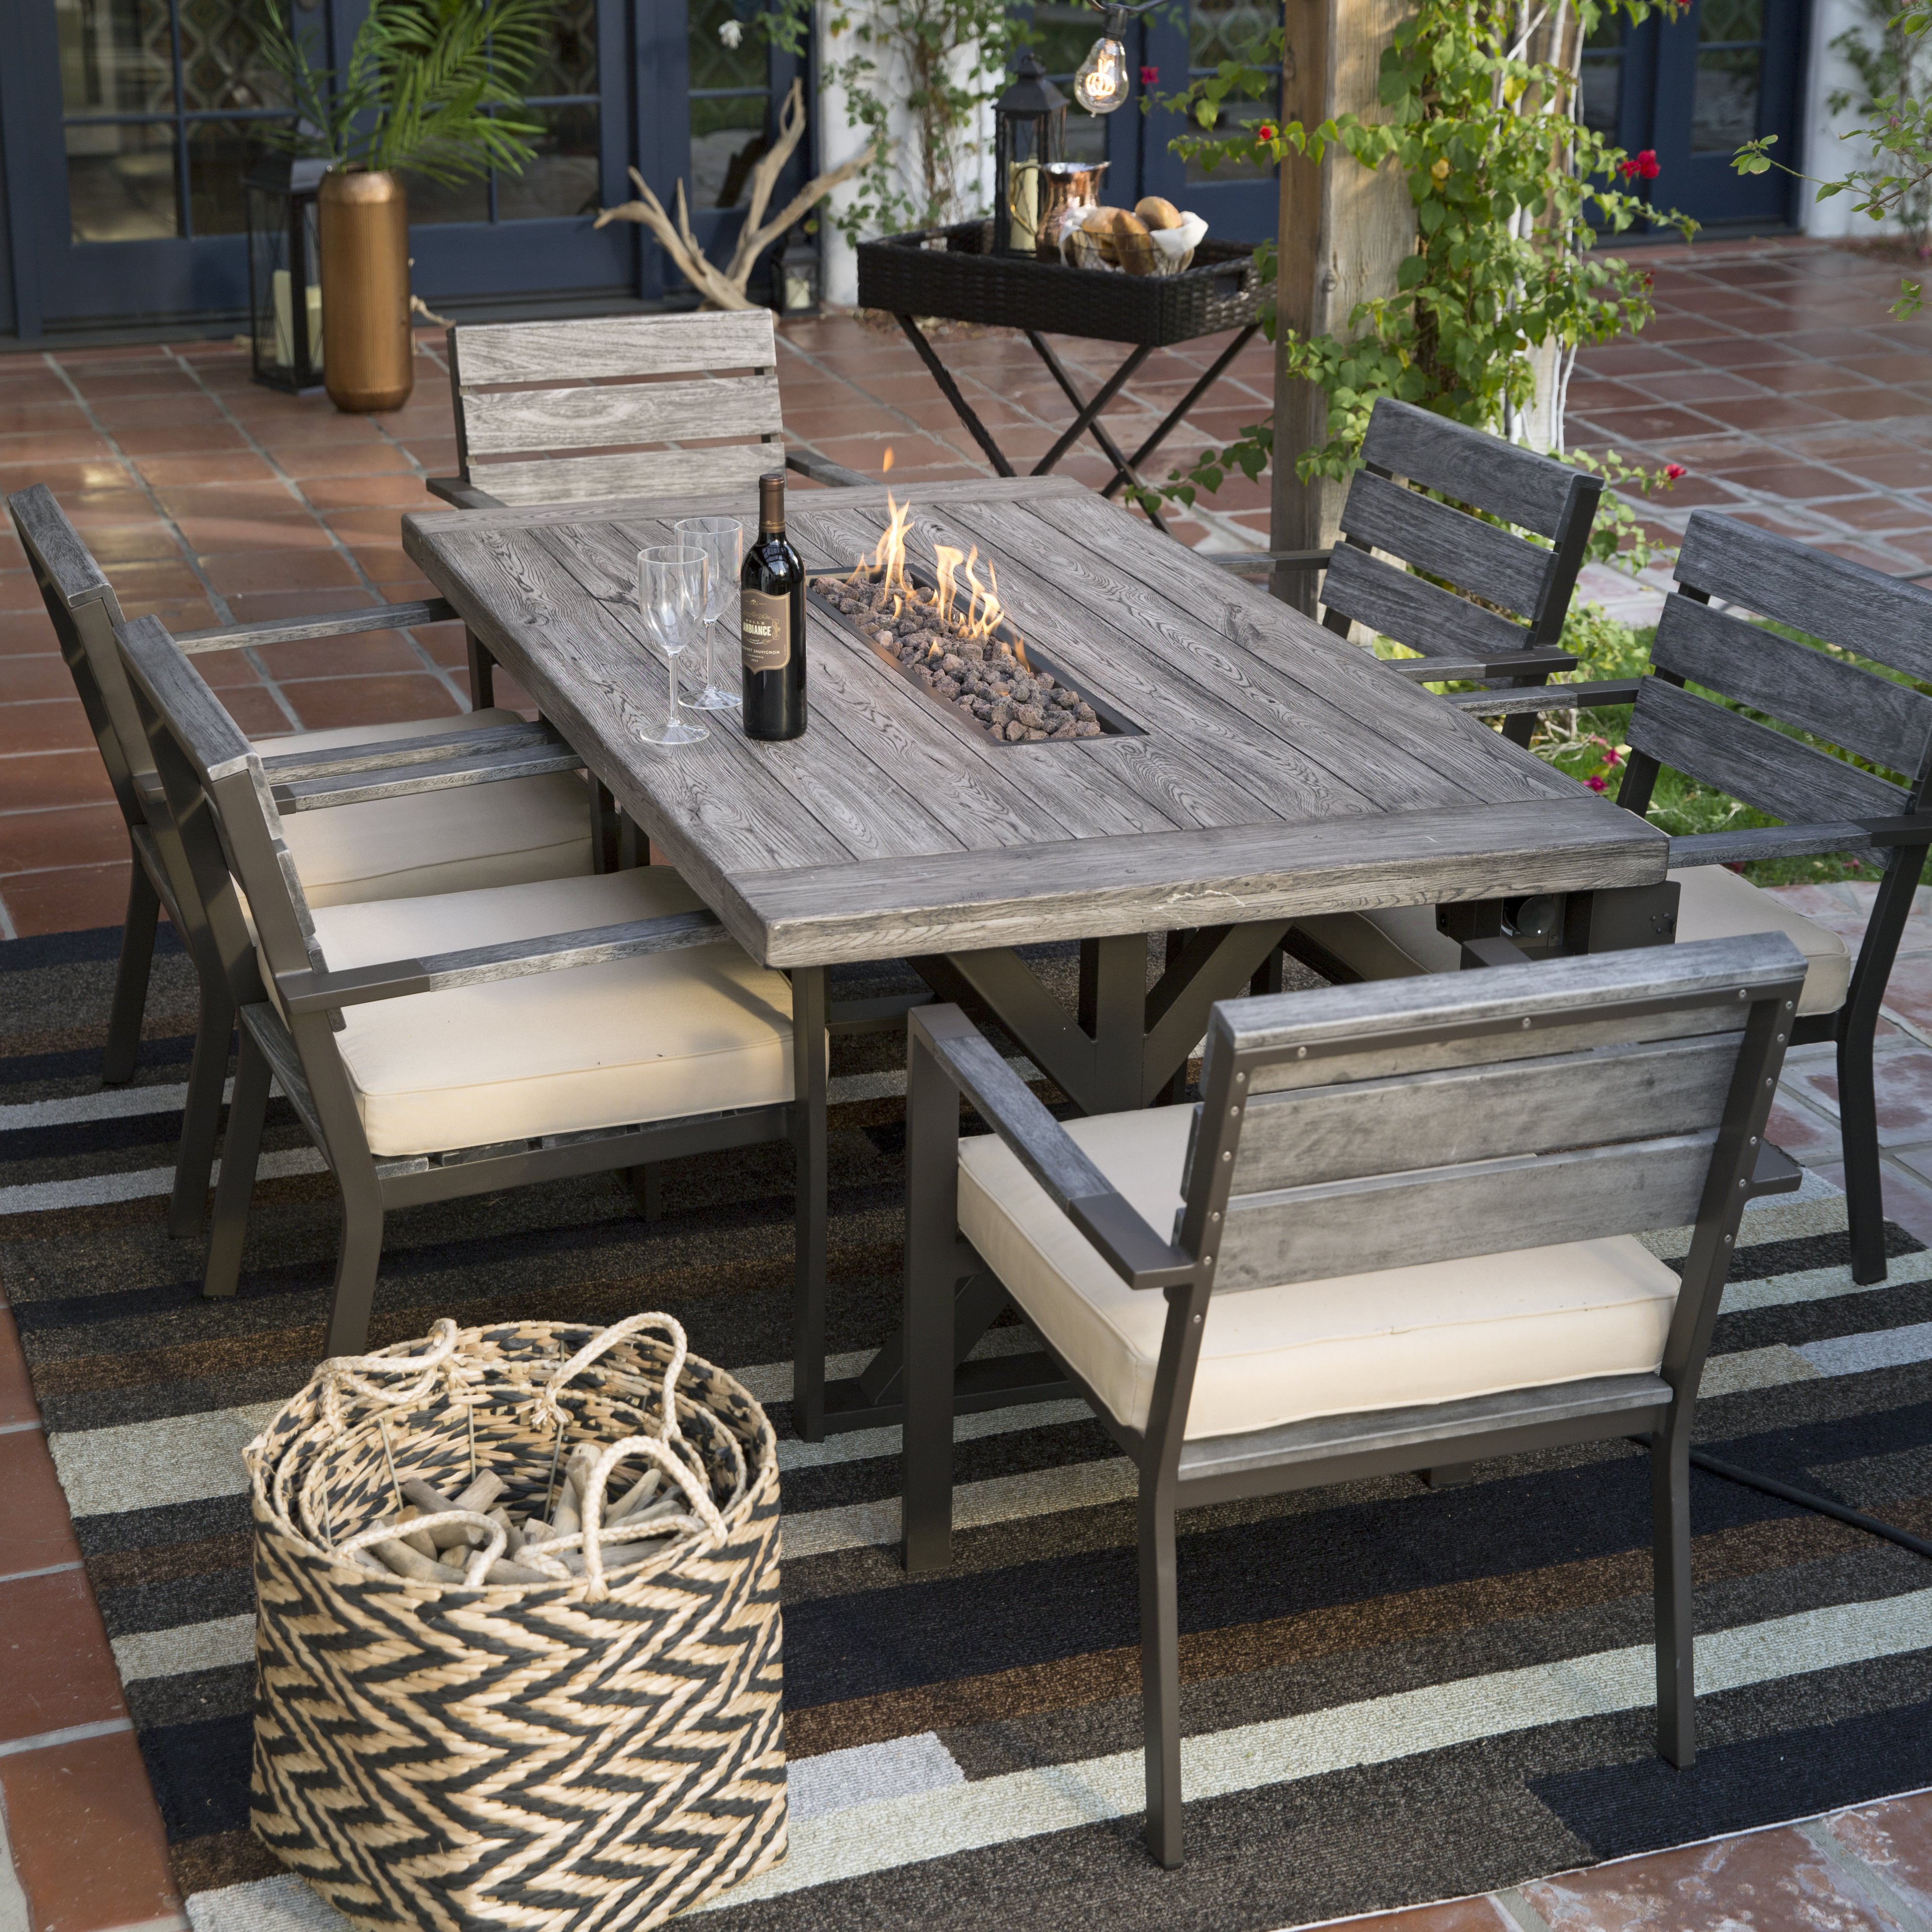 Dining tables for the terrace Dining table and chairs for the terrace in terms of durable outdoor sets blogbeen QODIIEJ